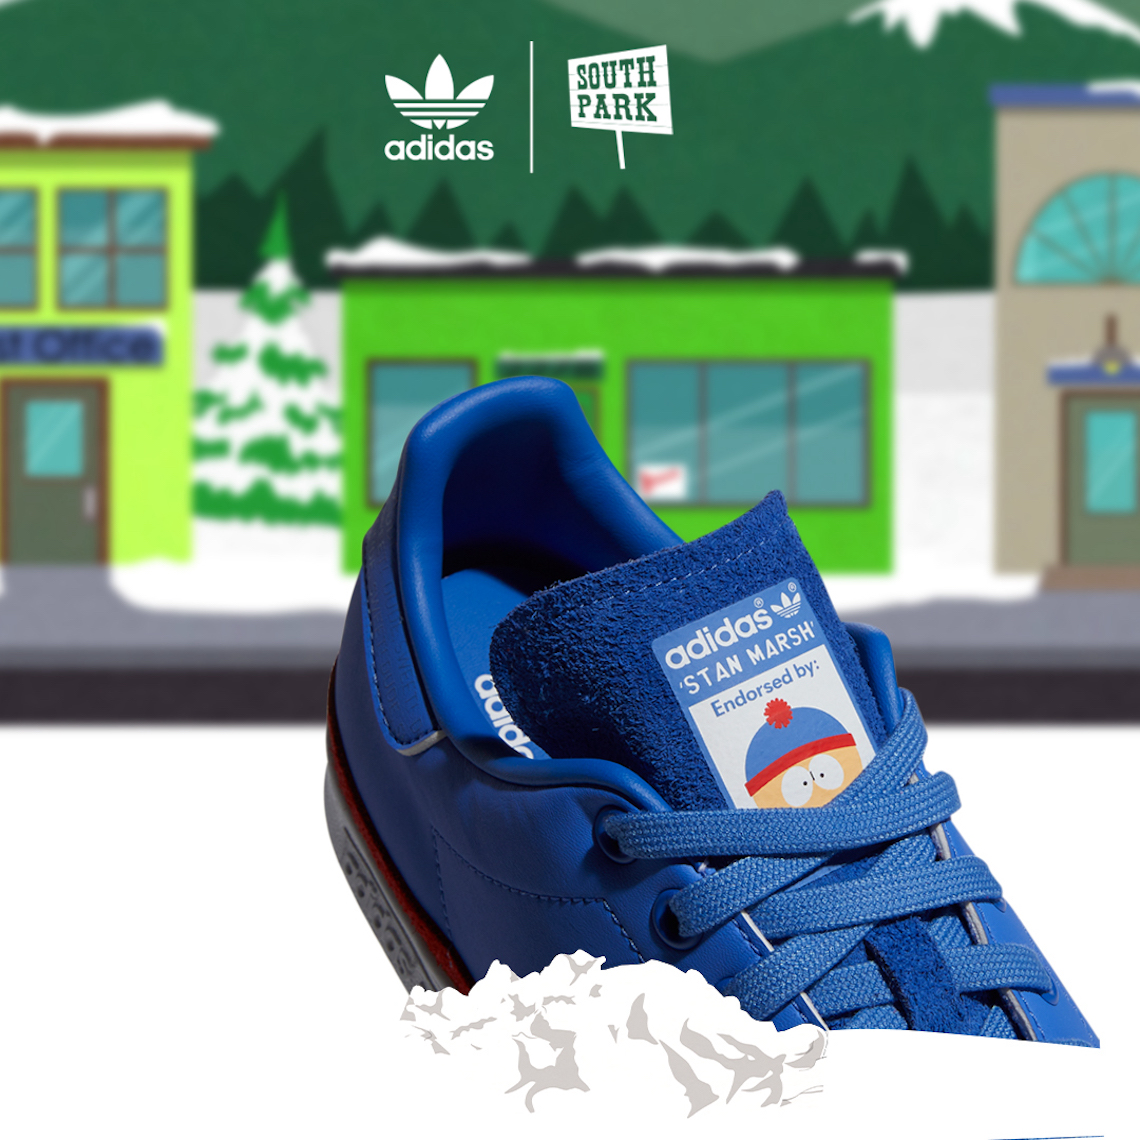 adidas x south park release date